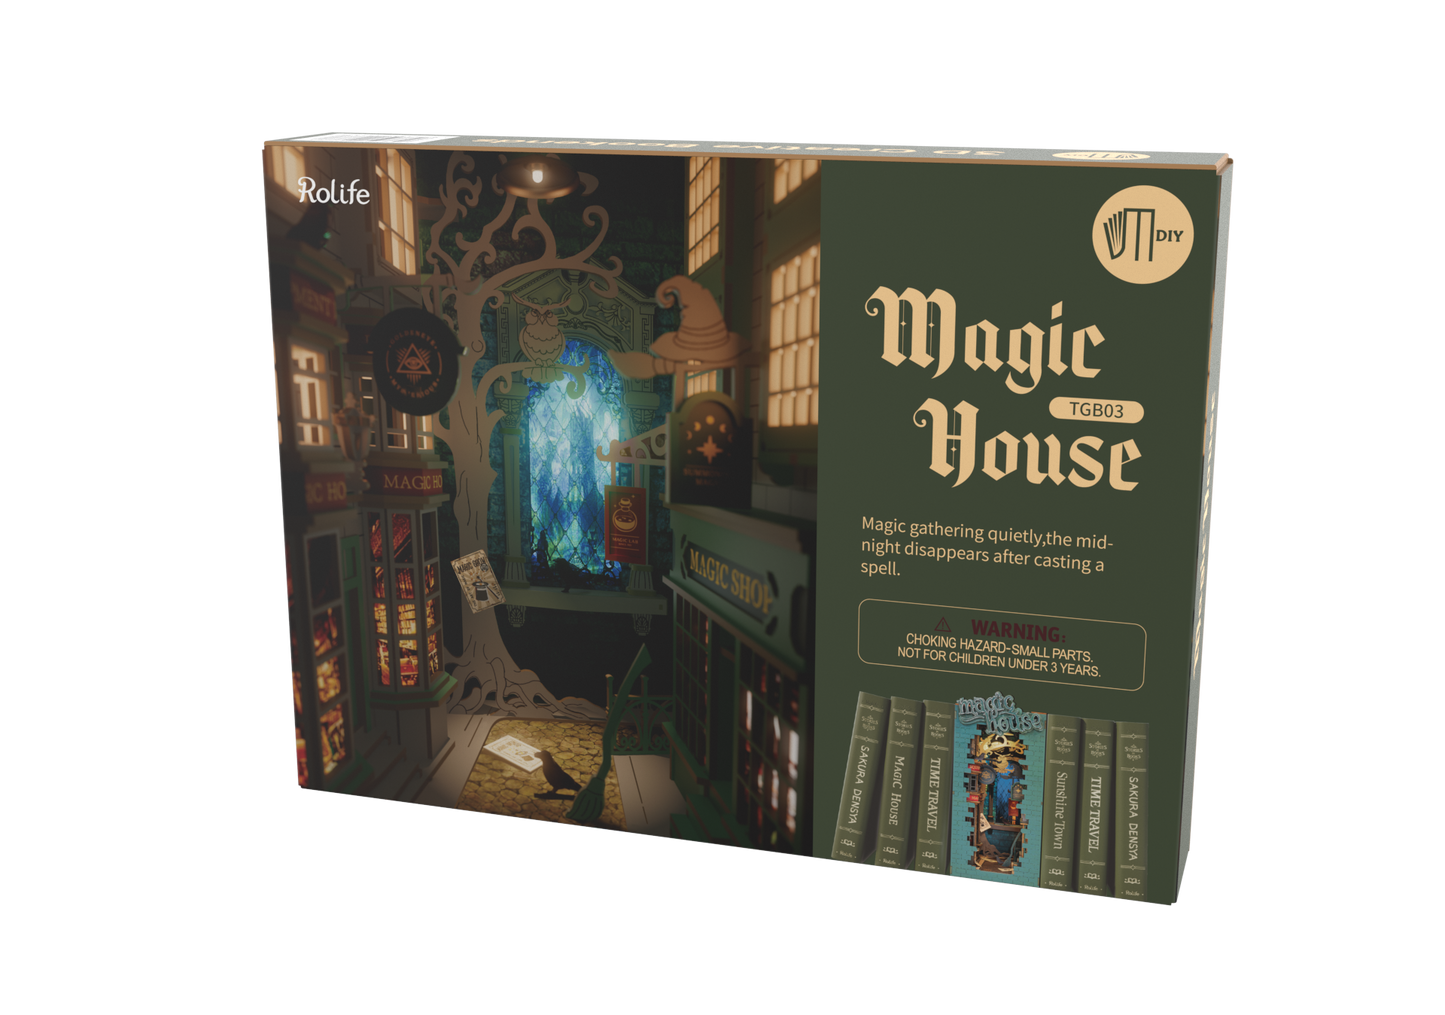 House Magic House Book Nook Puzzle